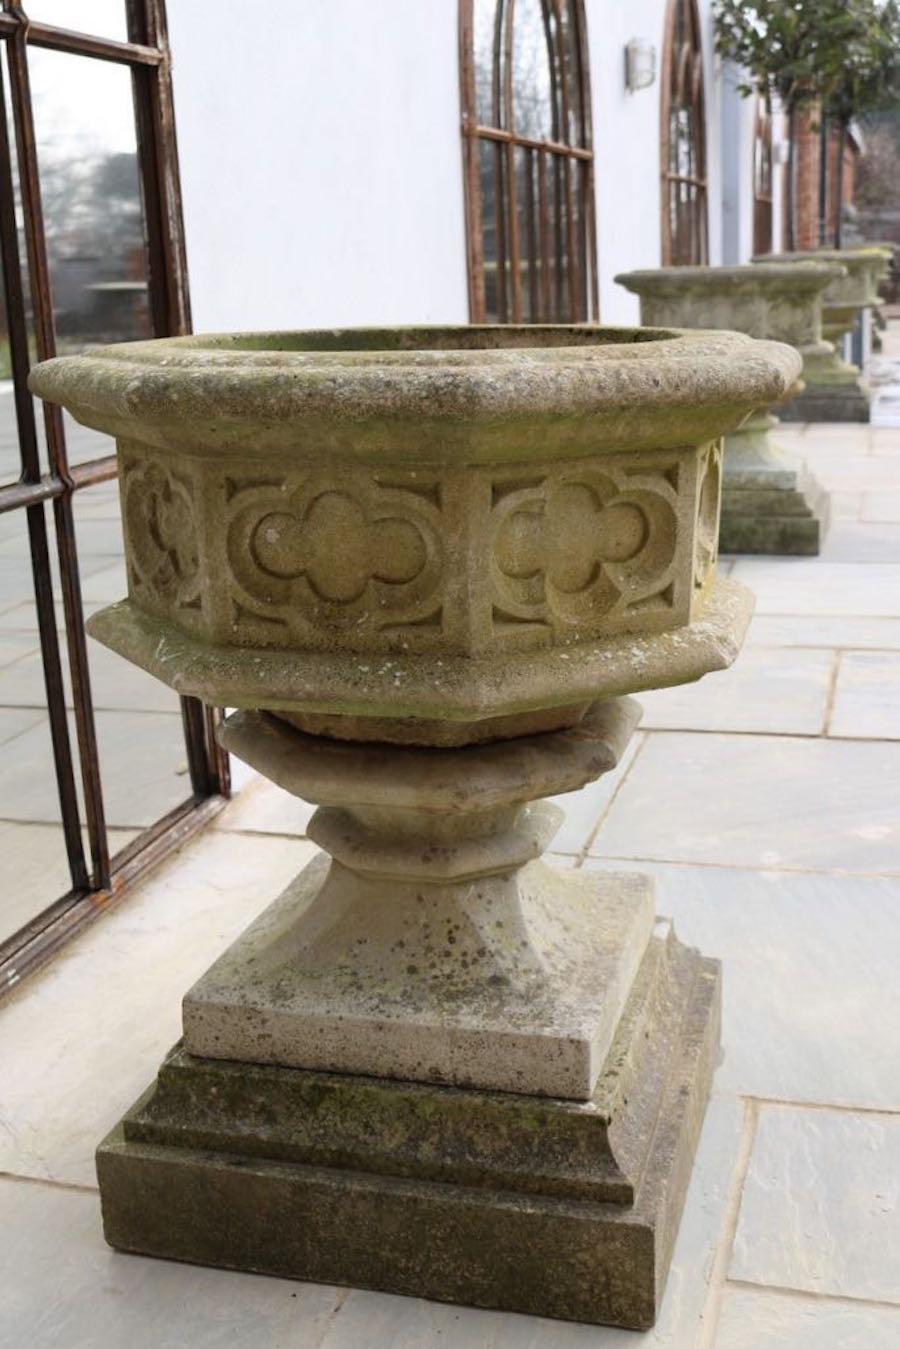 1920's English pair of octagonal shaped stone garden urns on stepped base.
Decorative gothic motif.
Stone is embedded with spores and lichen create natural patina.
ARRIVING TBD.